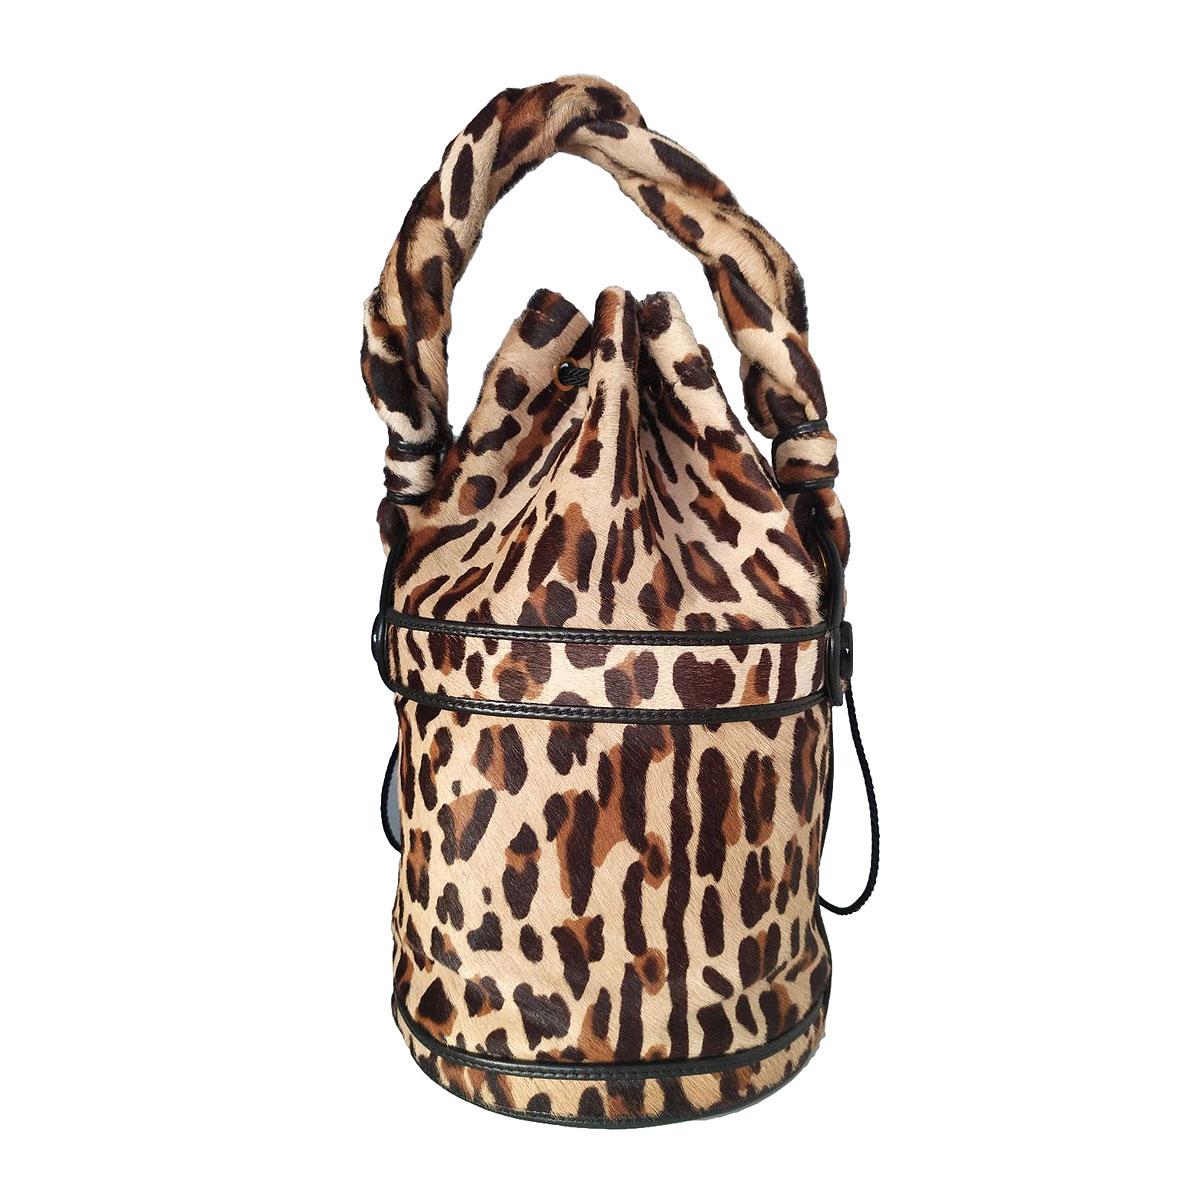 Superb Fendi bag
Calf leather
Animalier fancy
Cylindrical shape
Single twisted handle
One internal side pocket
Interior fabric with FF logo
Cm 32 x 19 (12,59 x 7,48 inches)
With dustbag
Original price € 1800
Worldwide express shipping included in